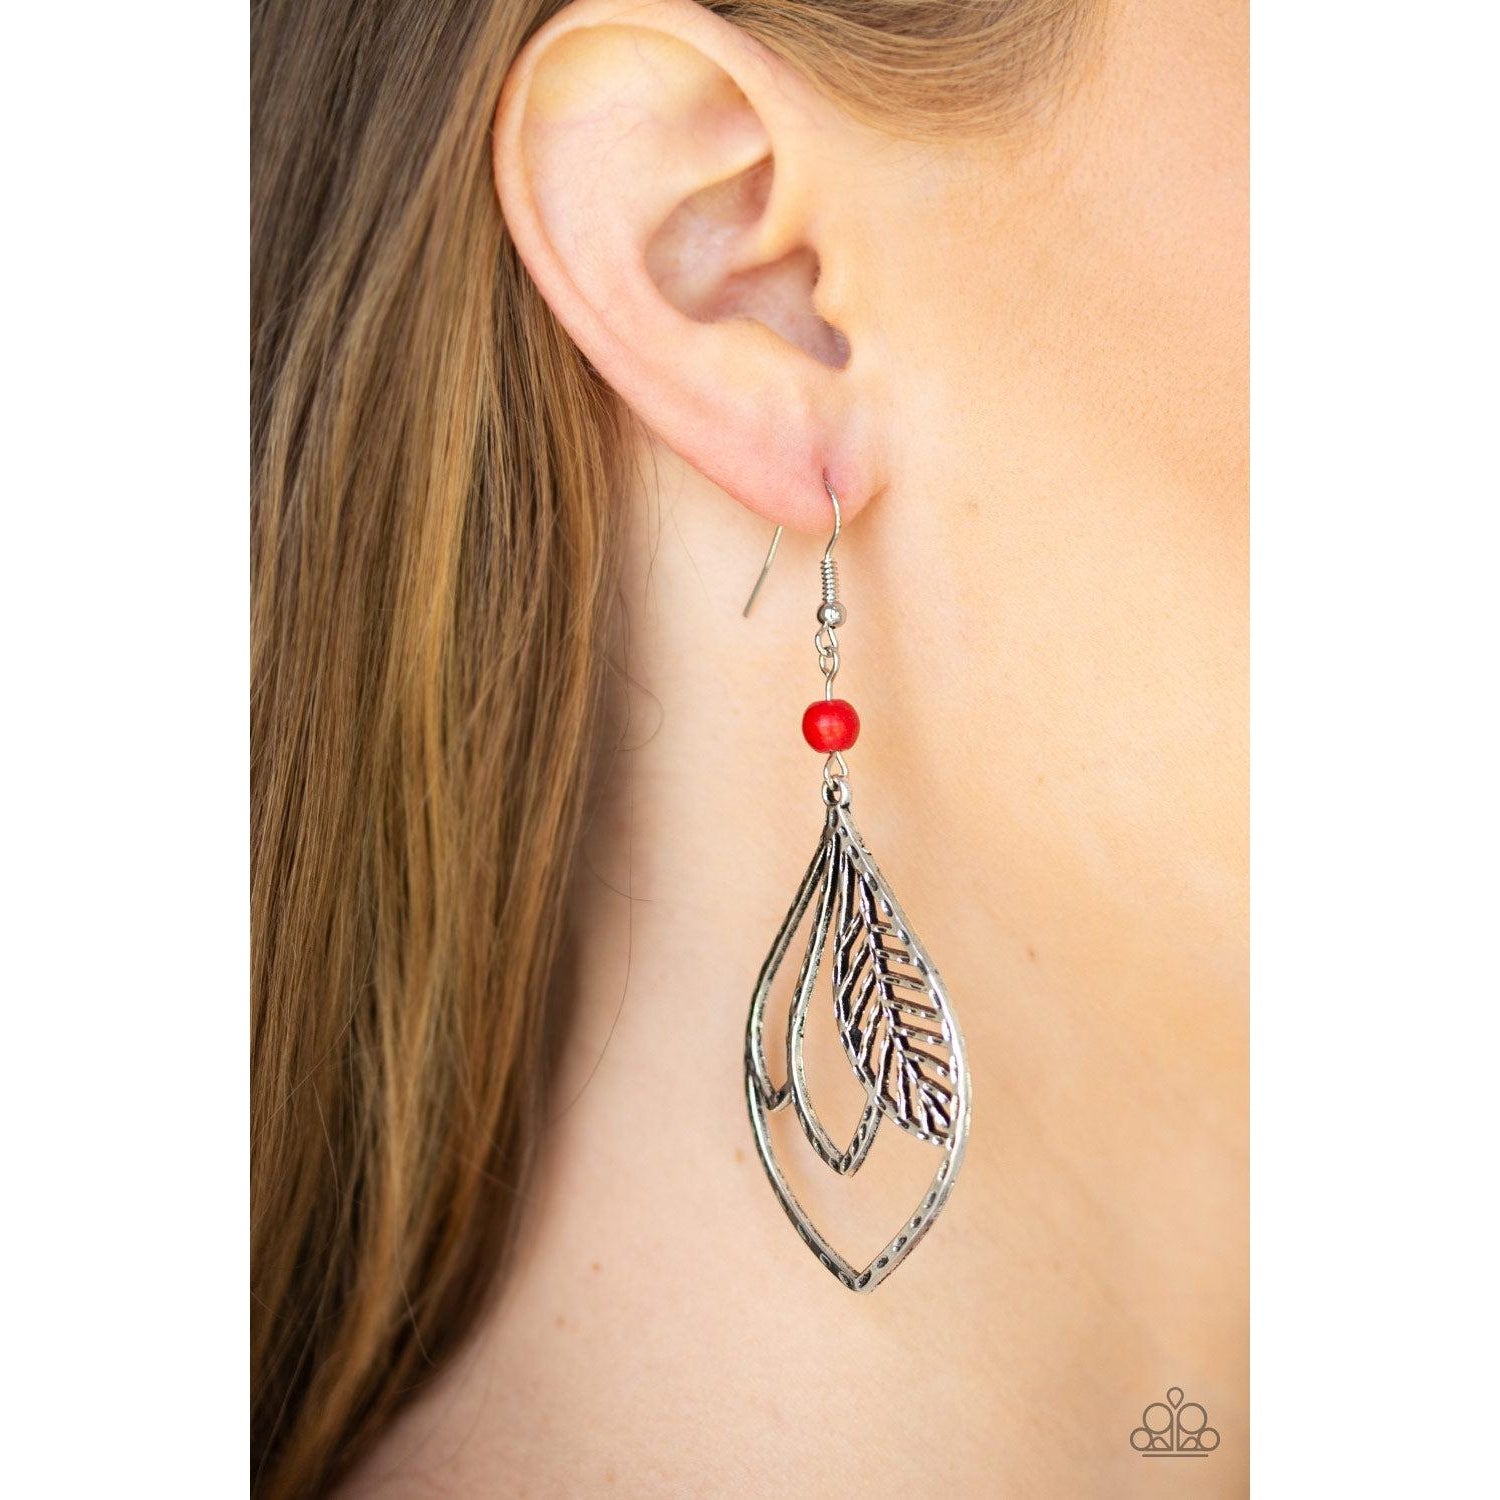 Paparazzi Absolutely Airborne Red Pierced Earrings